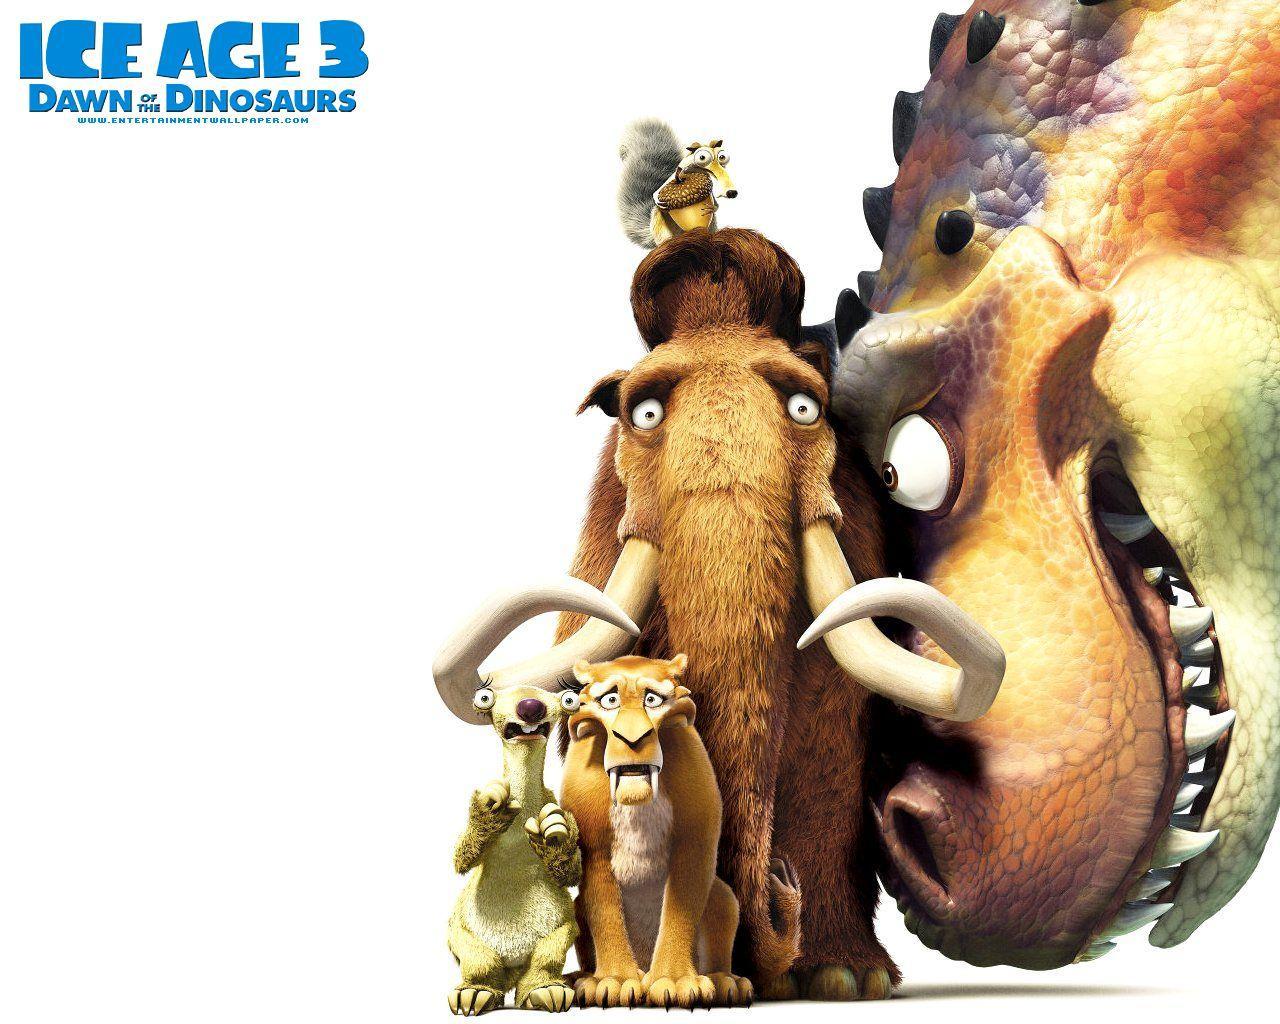 Ice Age 3! Age 3: dawn of the dinosaurs Wallpaper 25462510